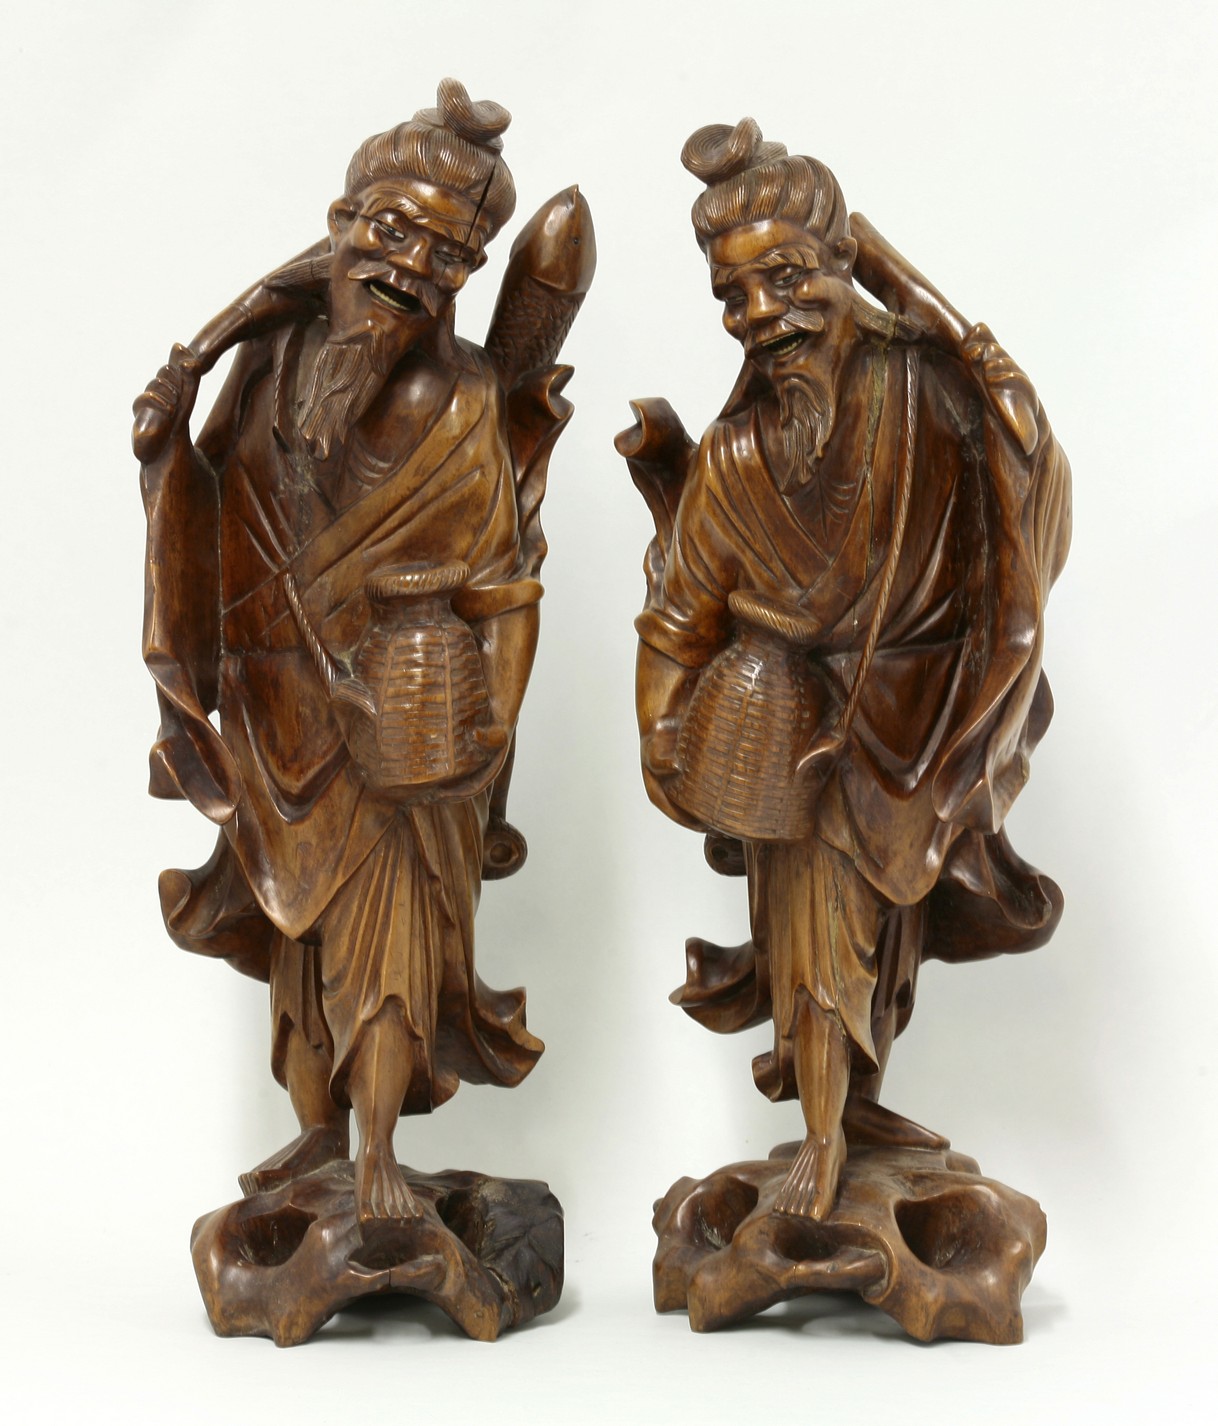 A pair of wood Fishermen,
late 19th century, each carved with creel, fish or oar, the eyes and teeth